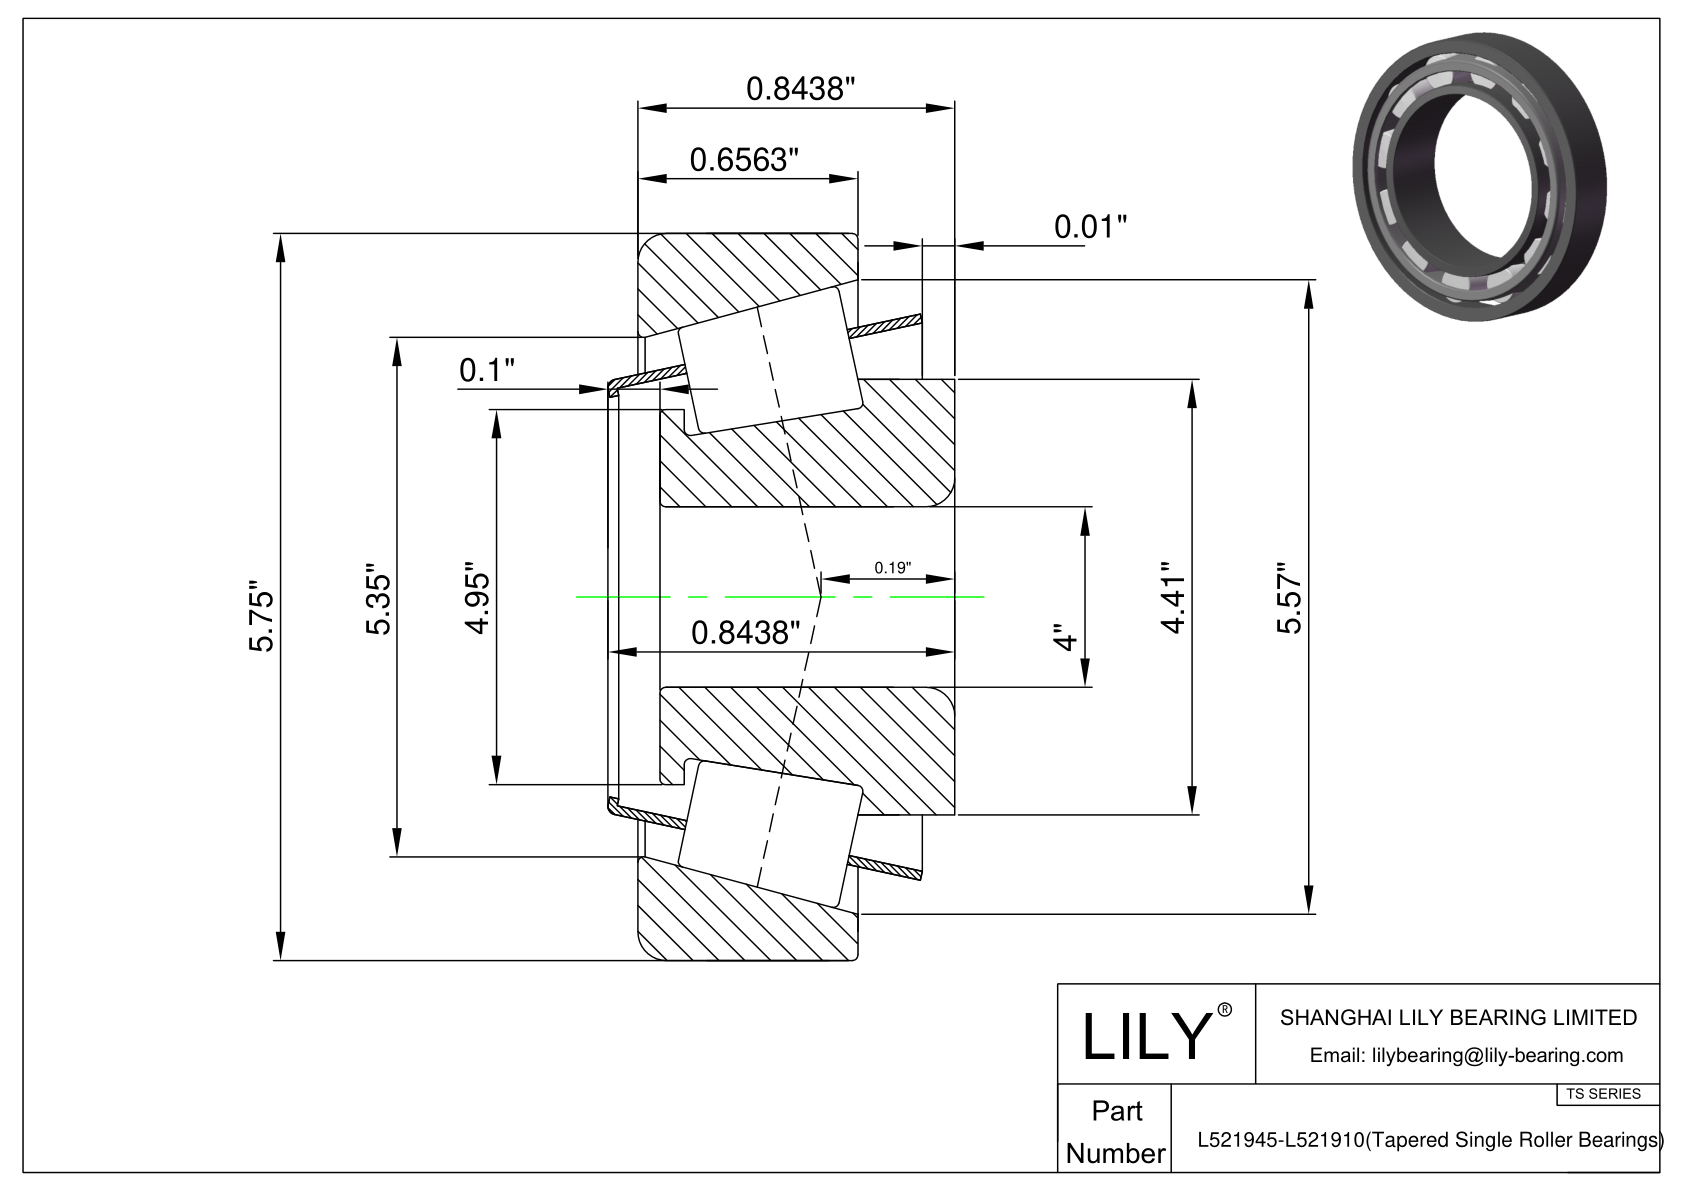 L521945-L521910 TS (Tapered Single Roller Bearings) (Imperial) cad drawing